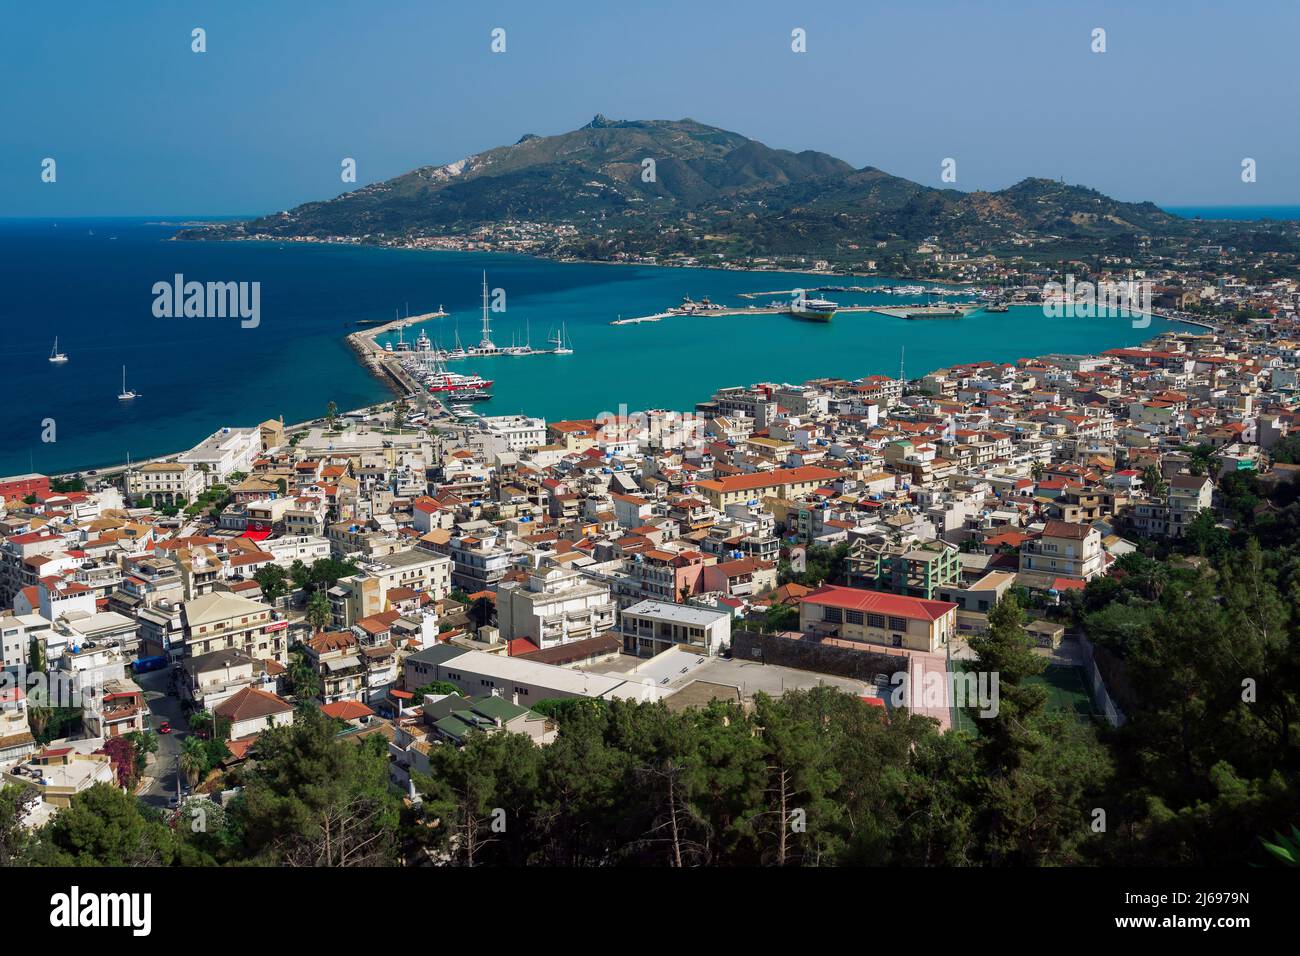 Zakynthos Town panorama with orange roof tiles low-rise buildings around the harbour, Zakynthos, Ionian Islands, Greek Islands, Greece, Europe Stock Photo